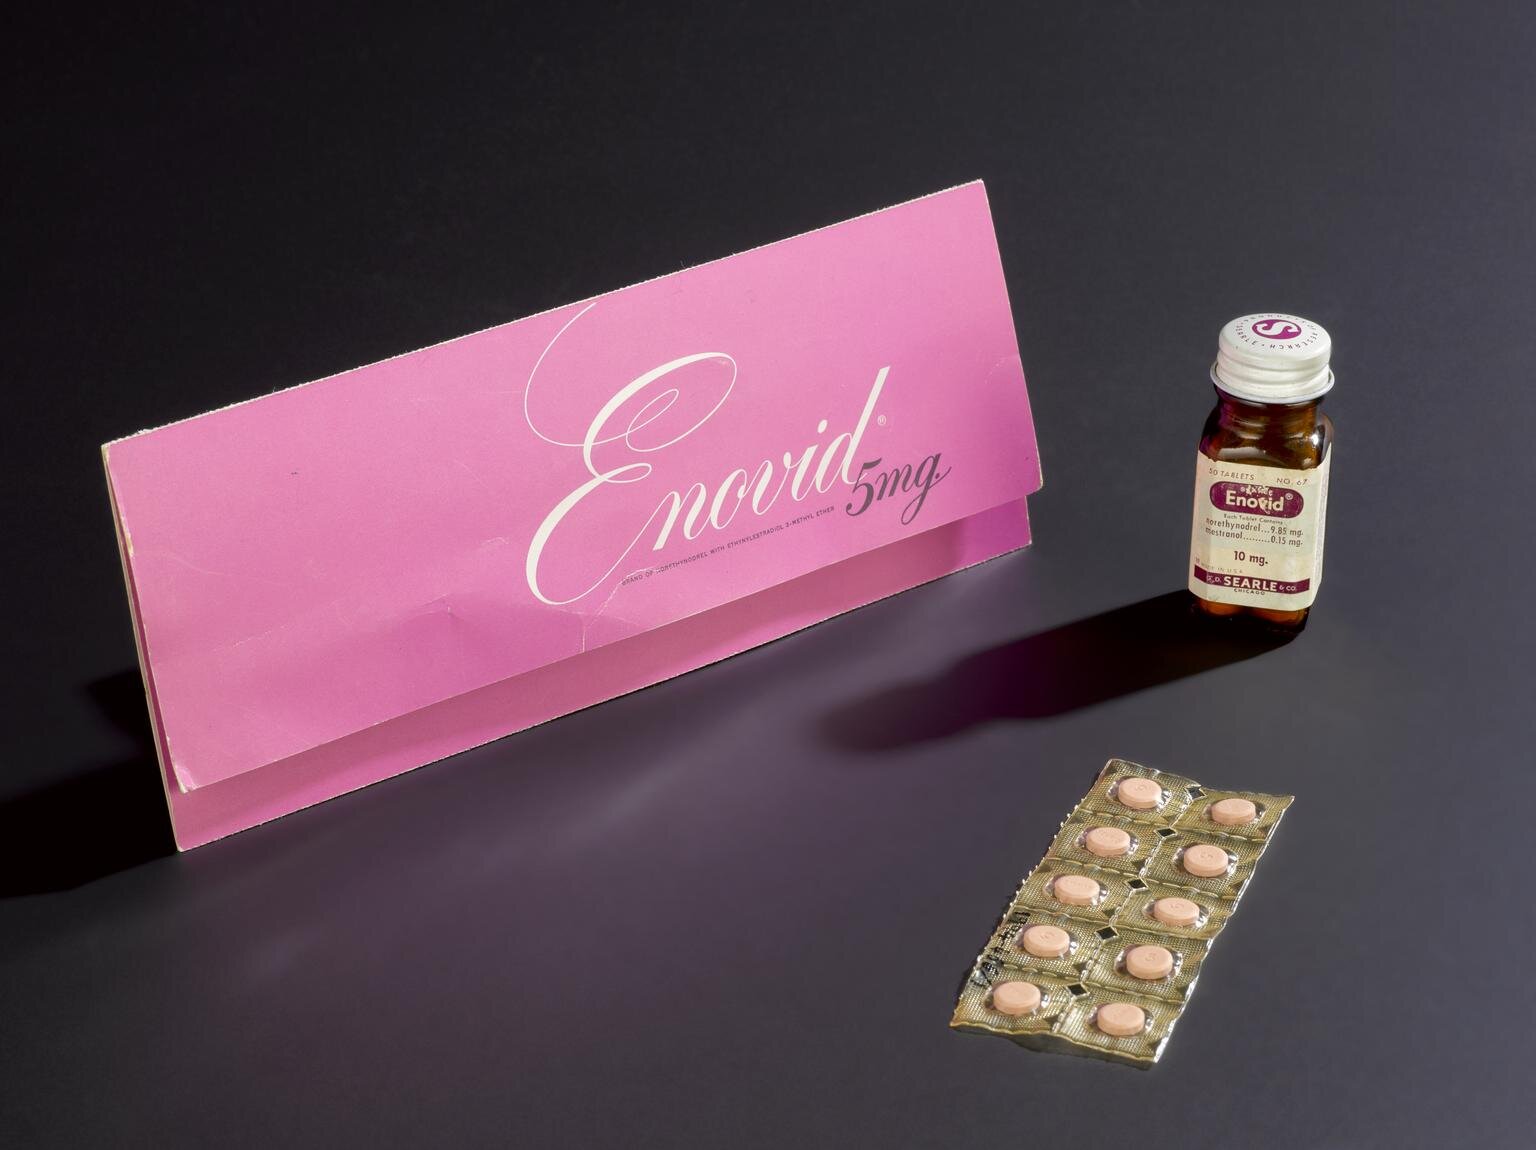  Pack for Enovid contraceptive pills